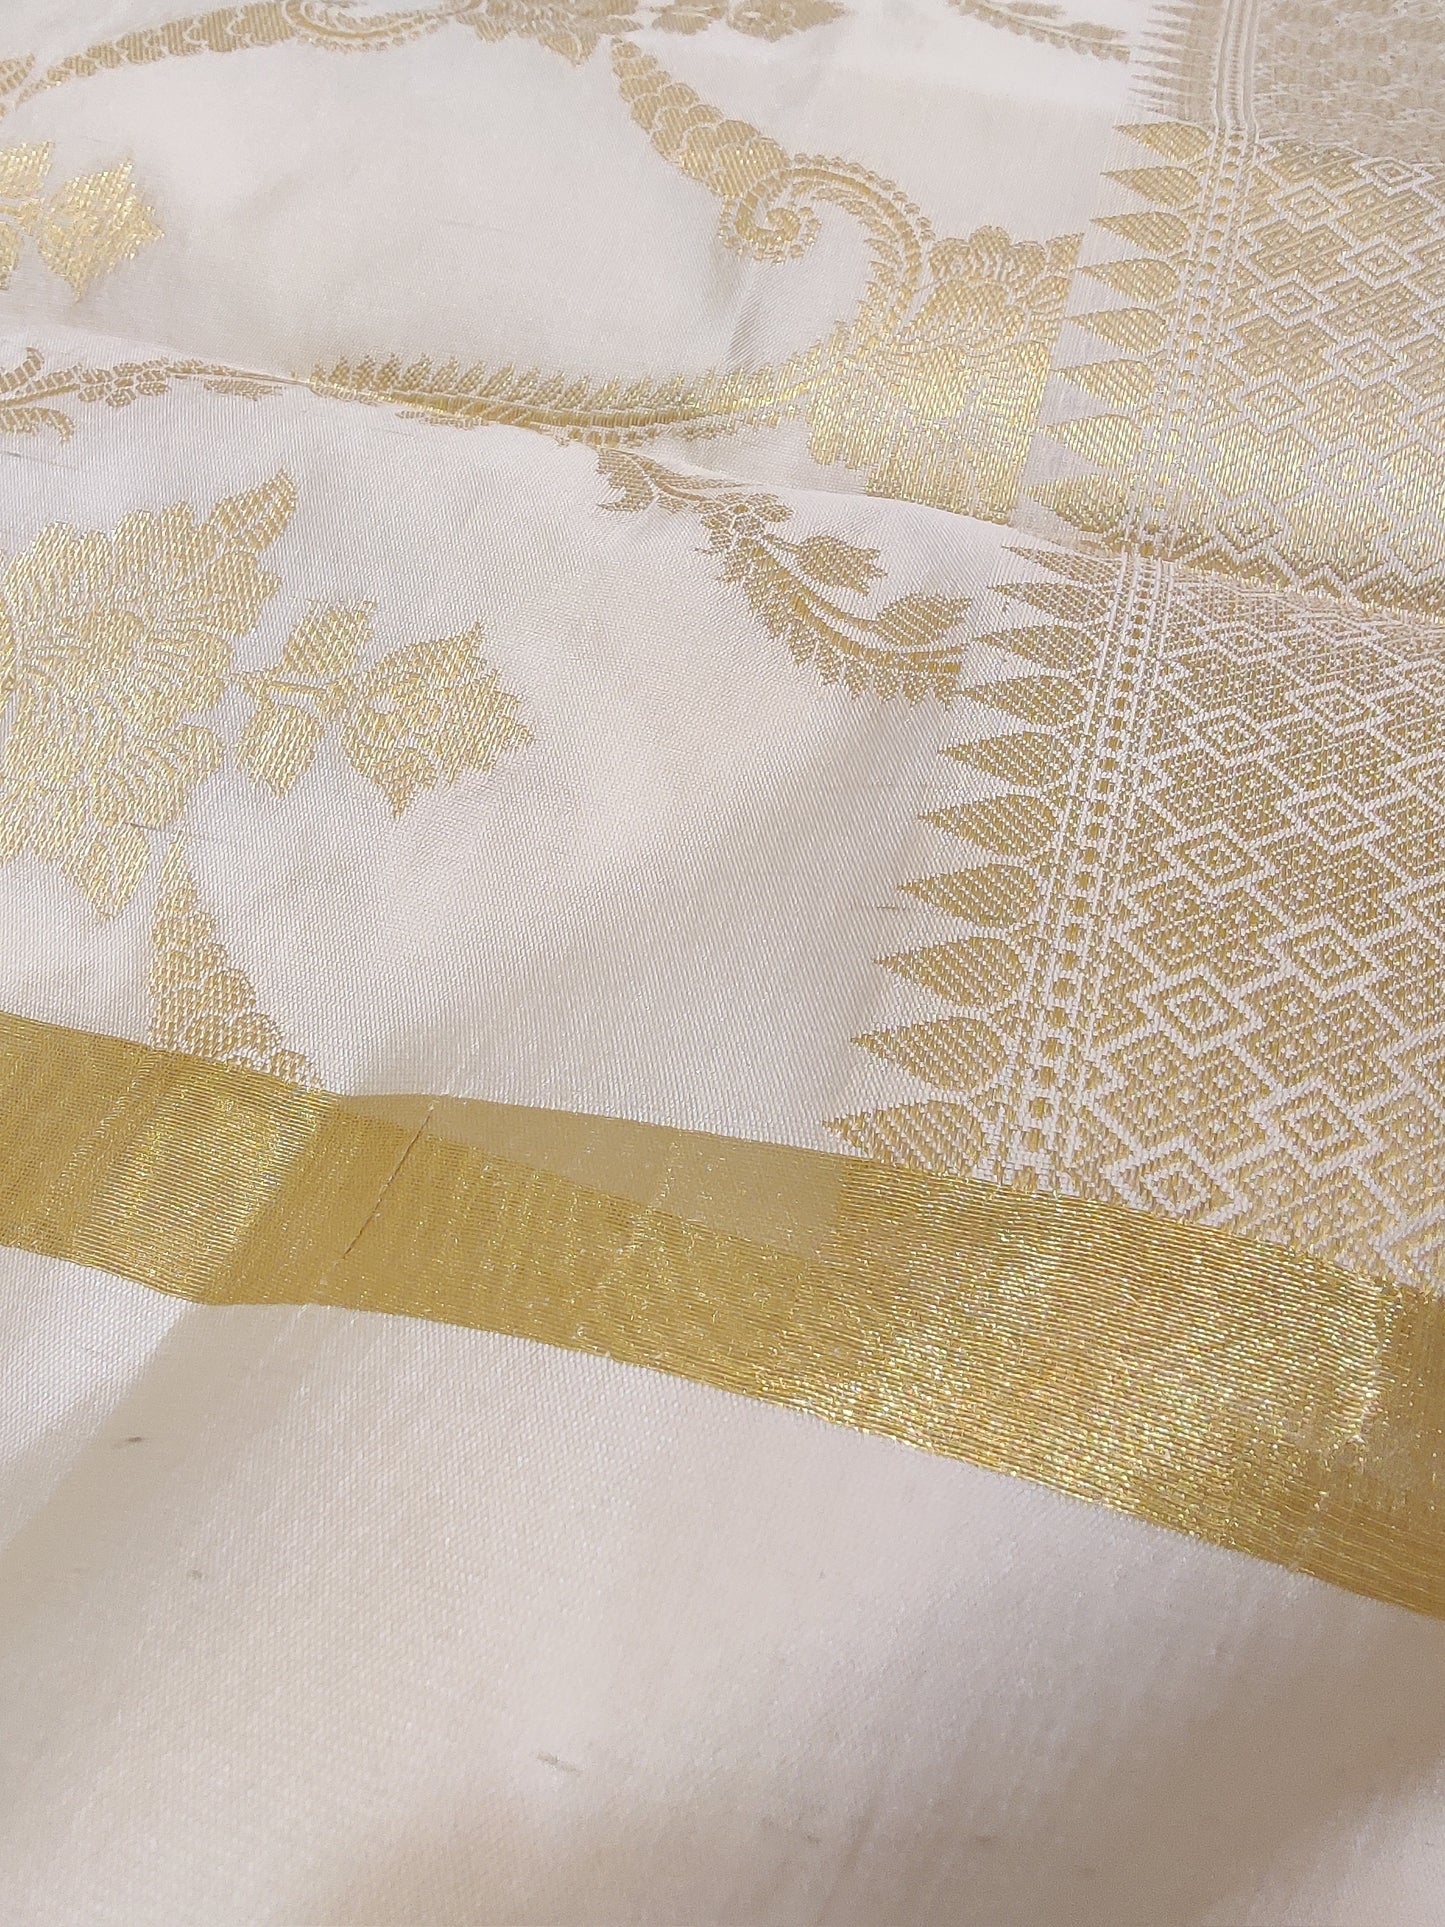 Banarasi Cotton Silk With Floral and Leaf Jaal Dupatta- White